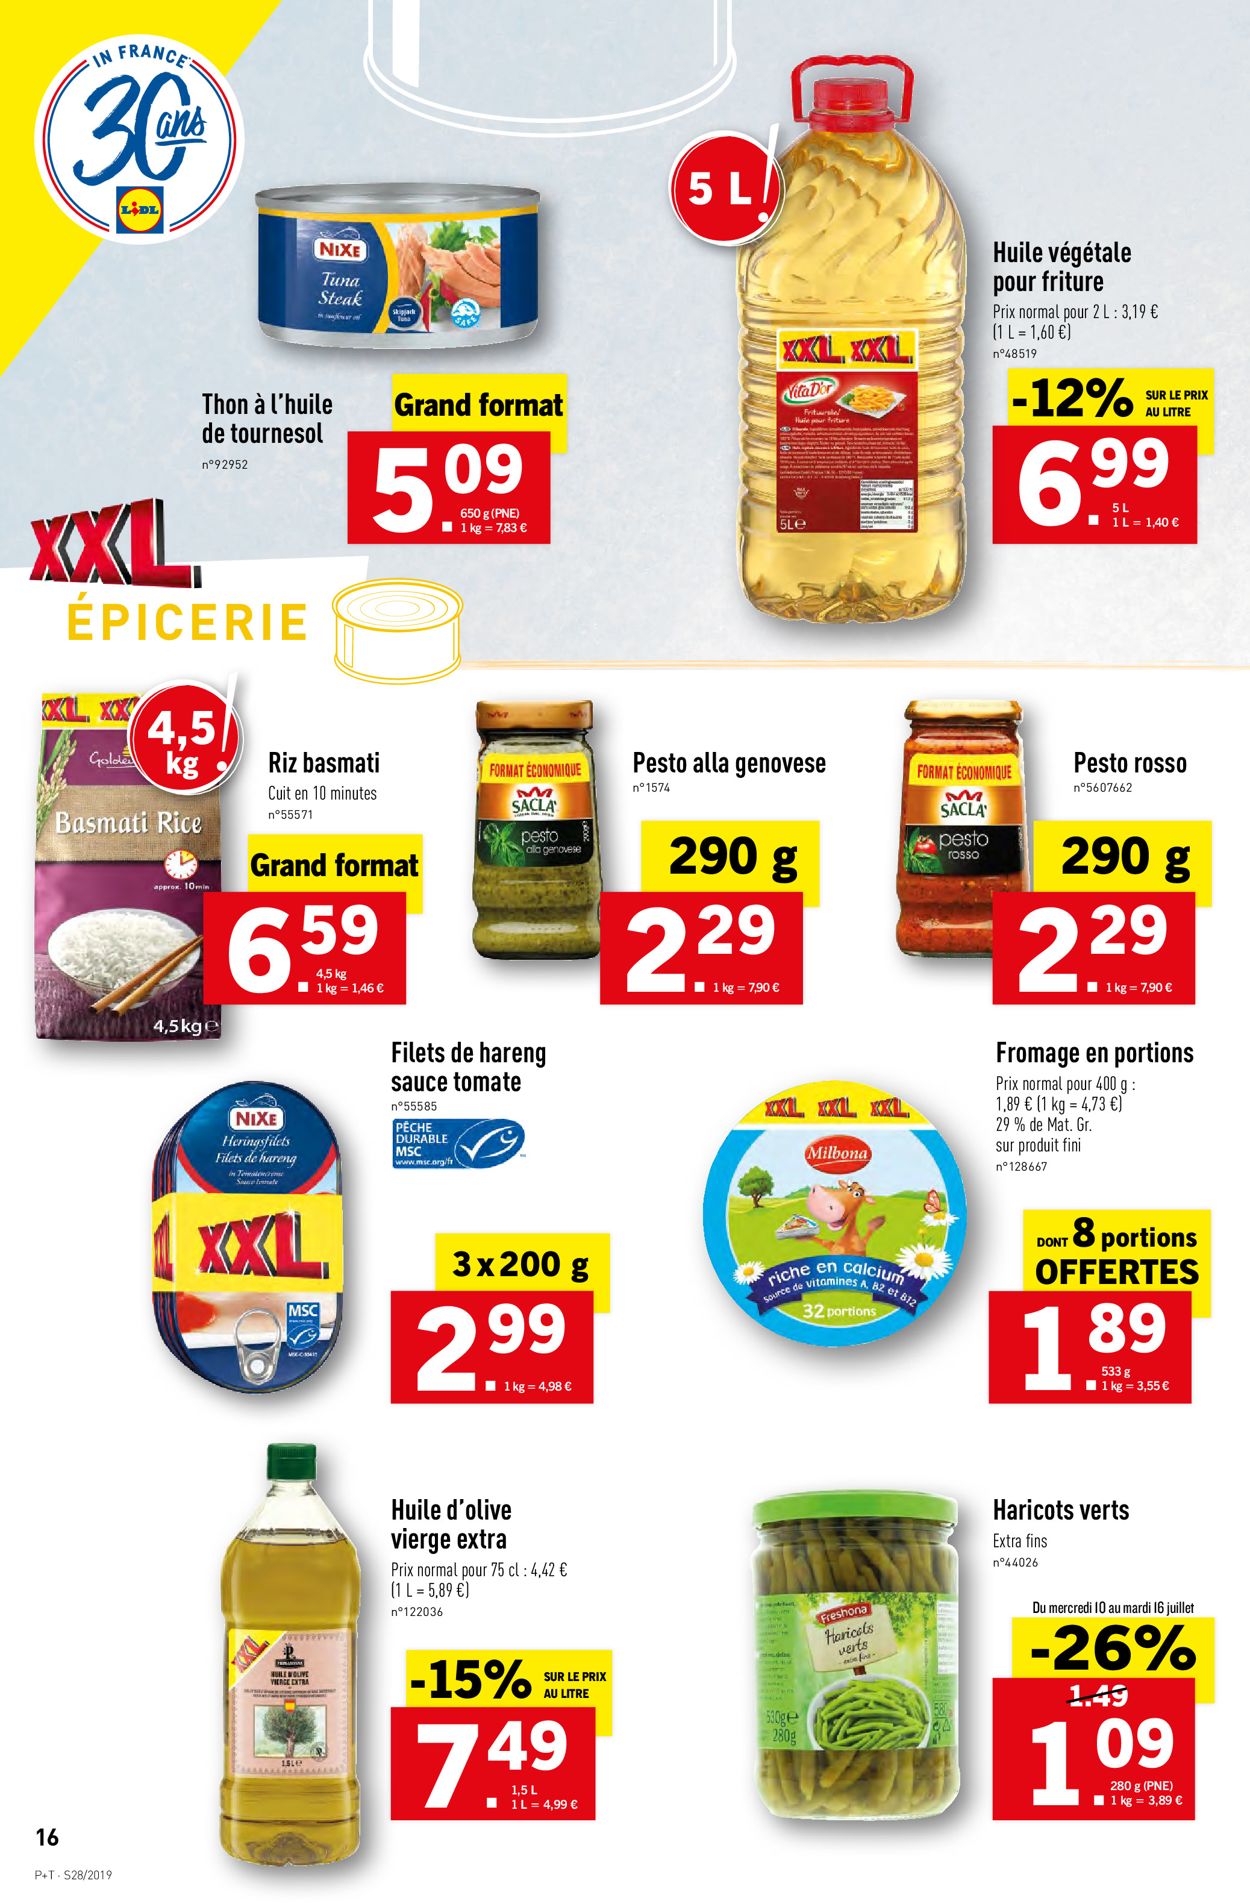 Lidl Catalogue - 10.07-16.07.2019 (Page 16)